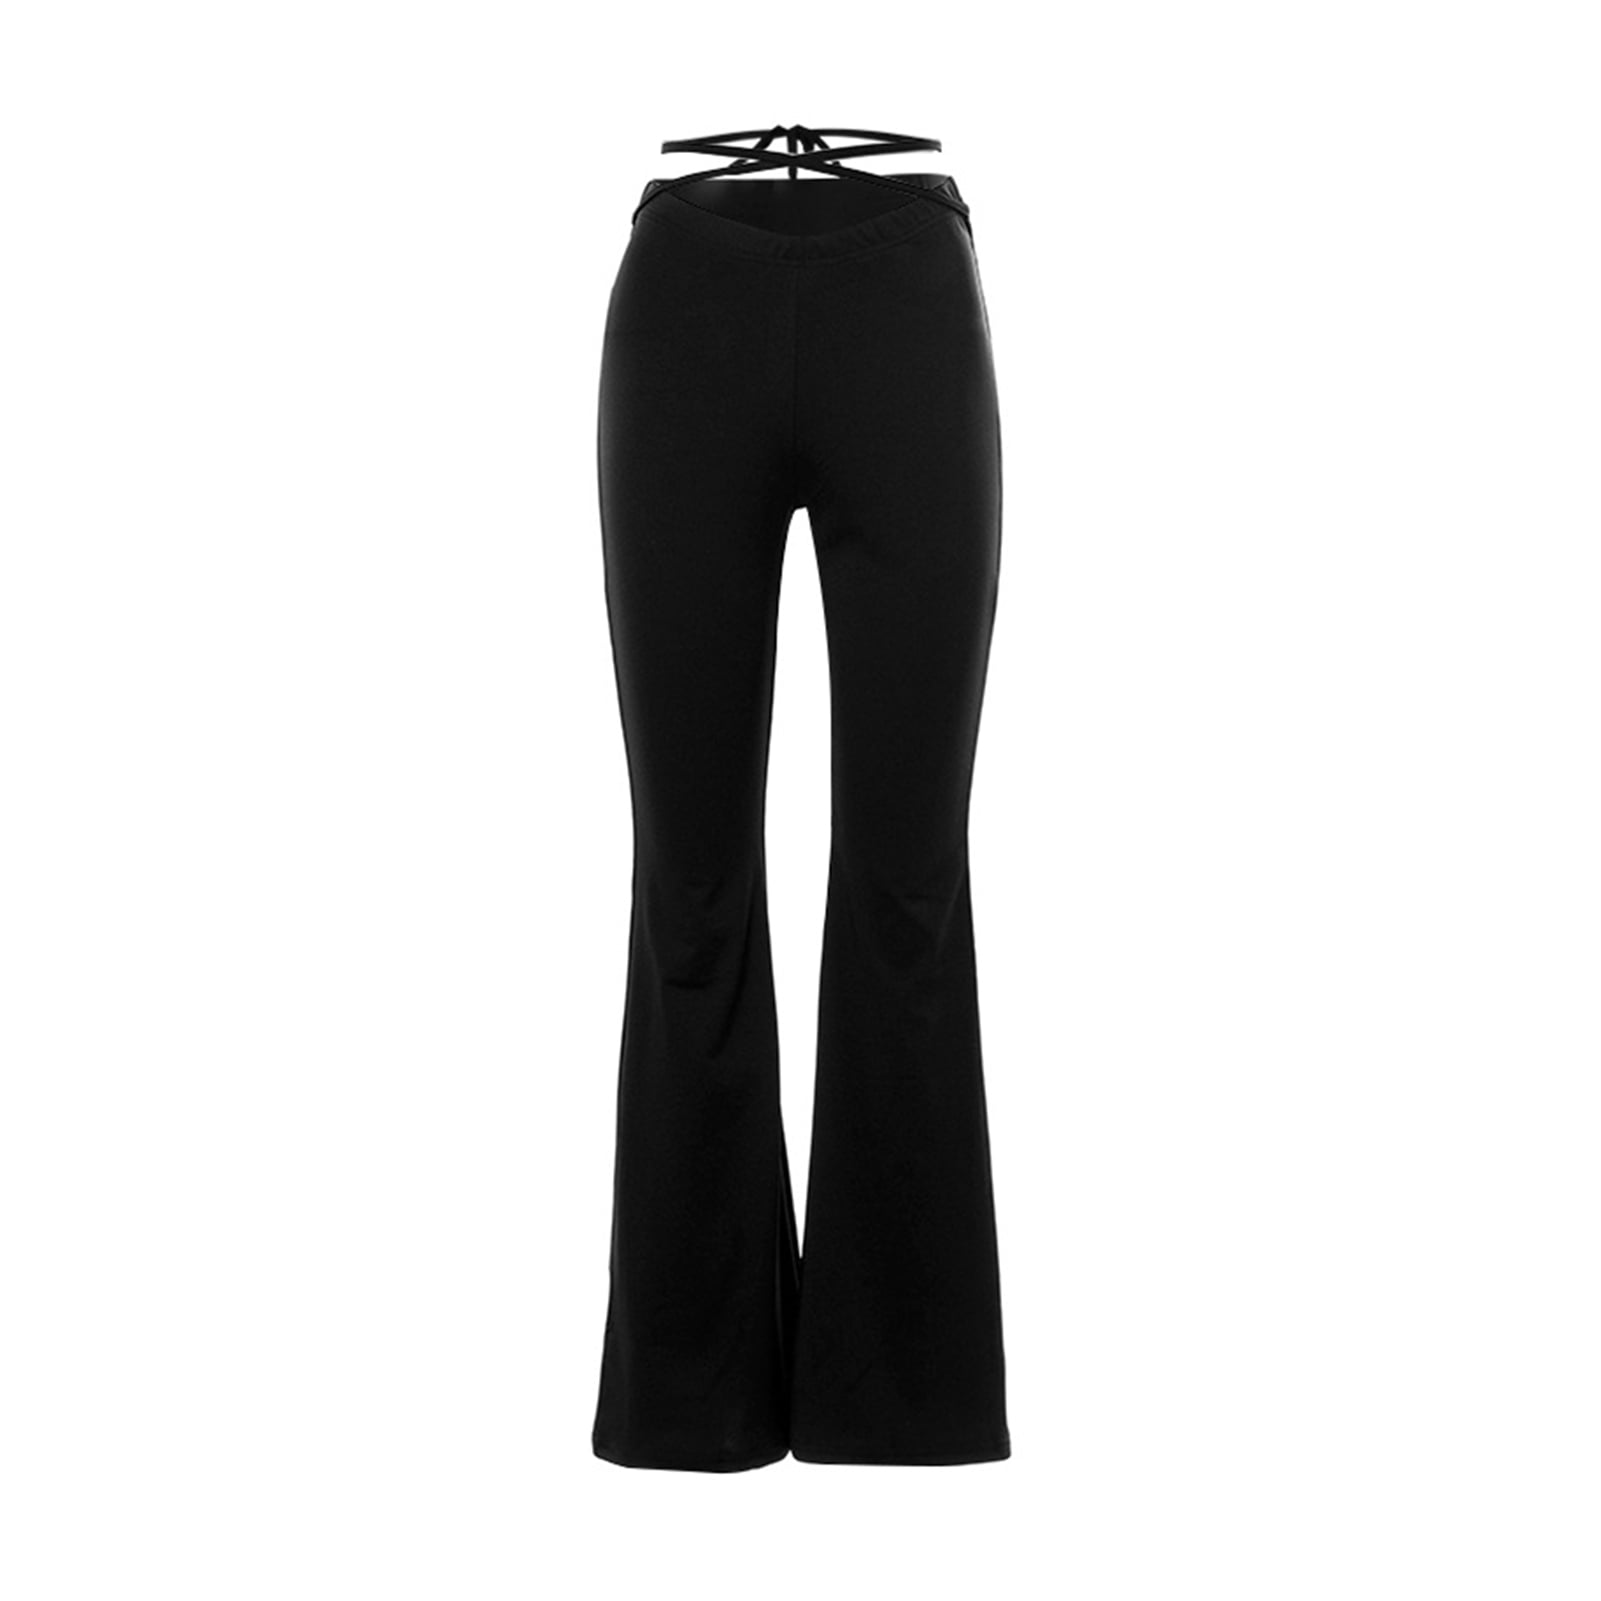 Y2K New Cold wash V-Shaped Waist Umbilical Cross Strap Flared Casual Pants Black Flared Trousers Outfit Casual